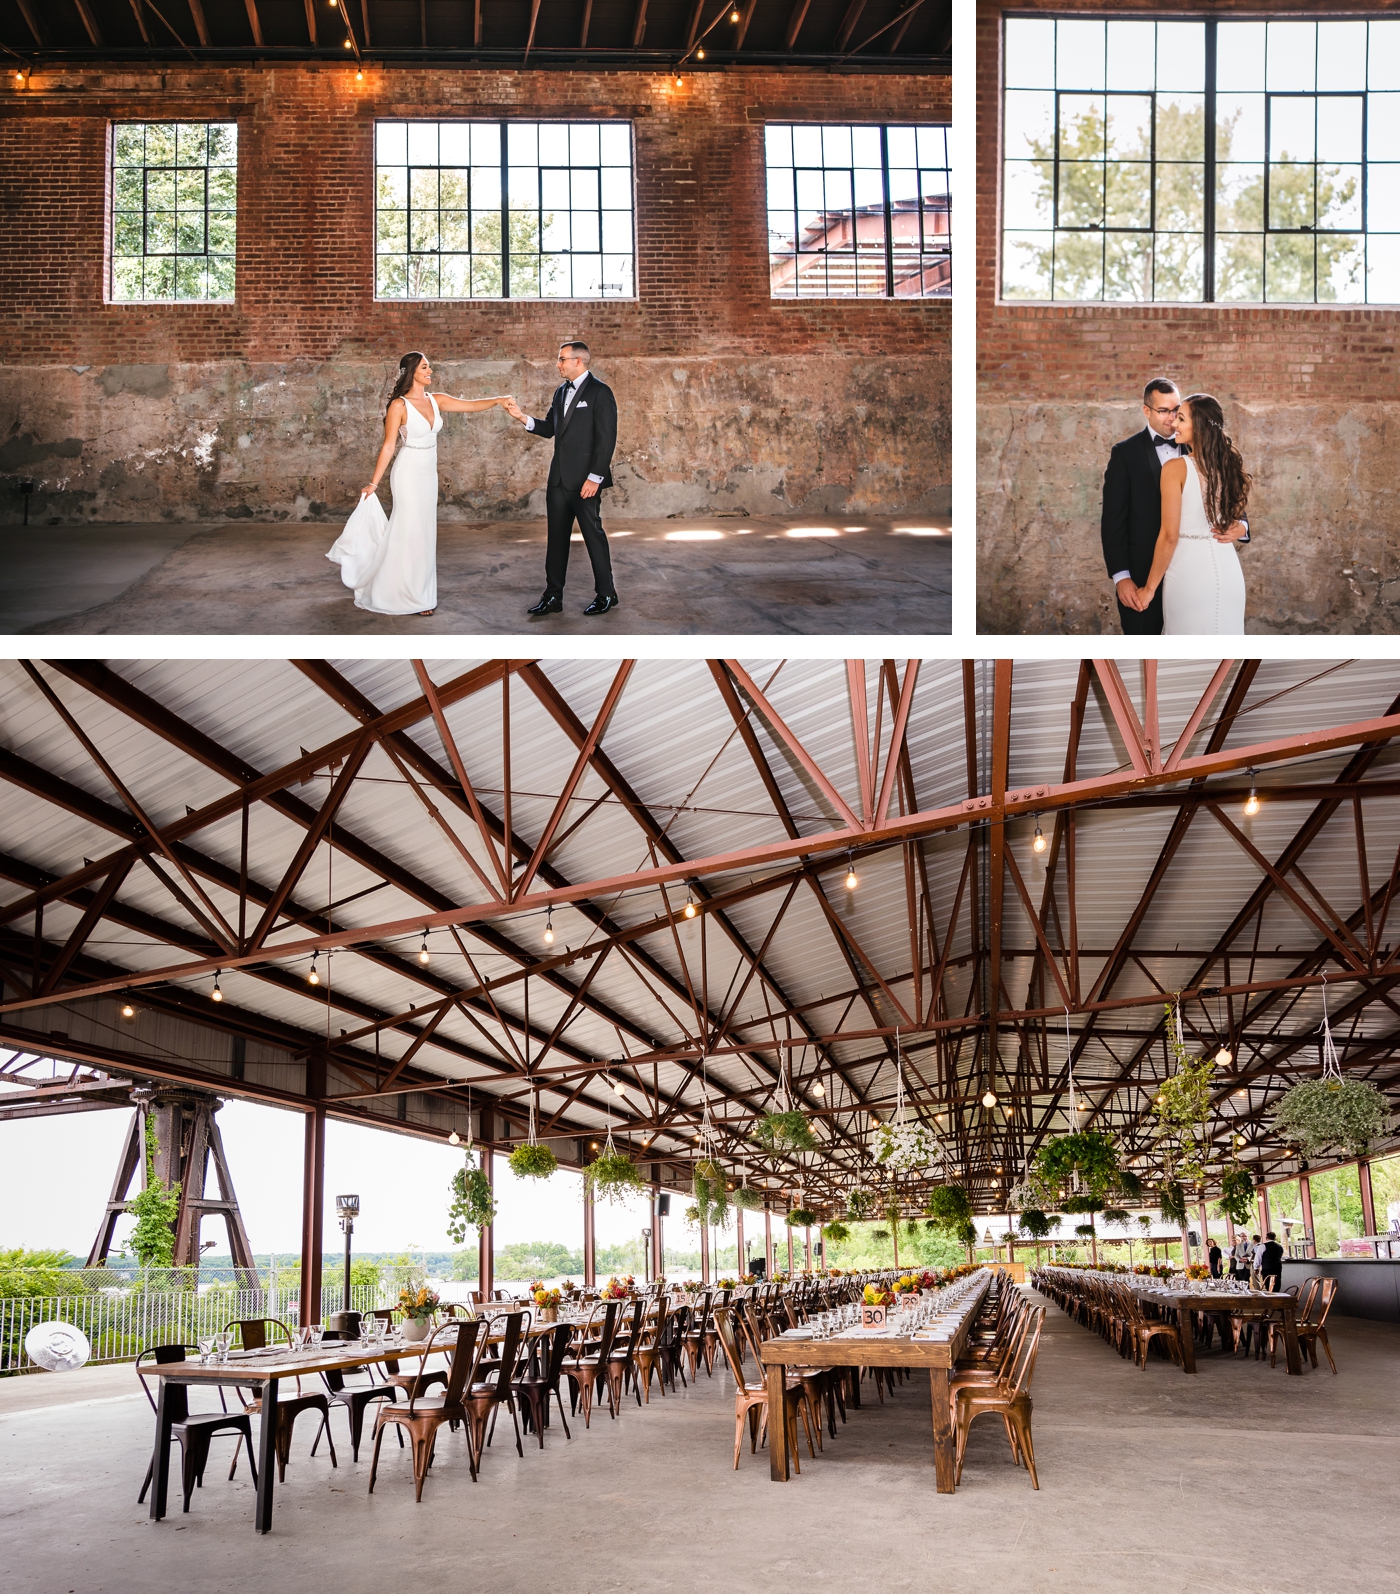 The 10 Most Intriguing Wedding Venues in Upstate New York 2020 | Hutton Brickyards | Verve Event Co.